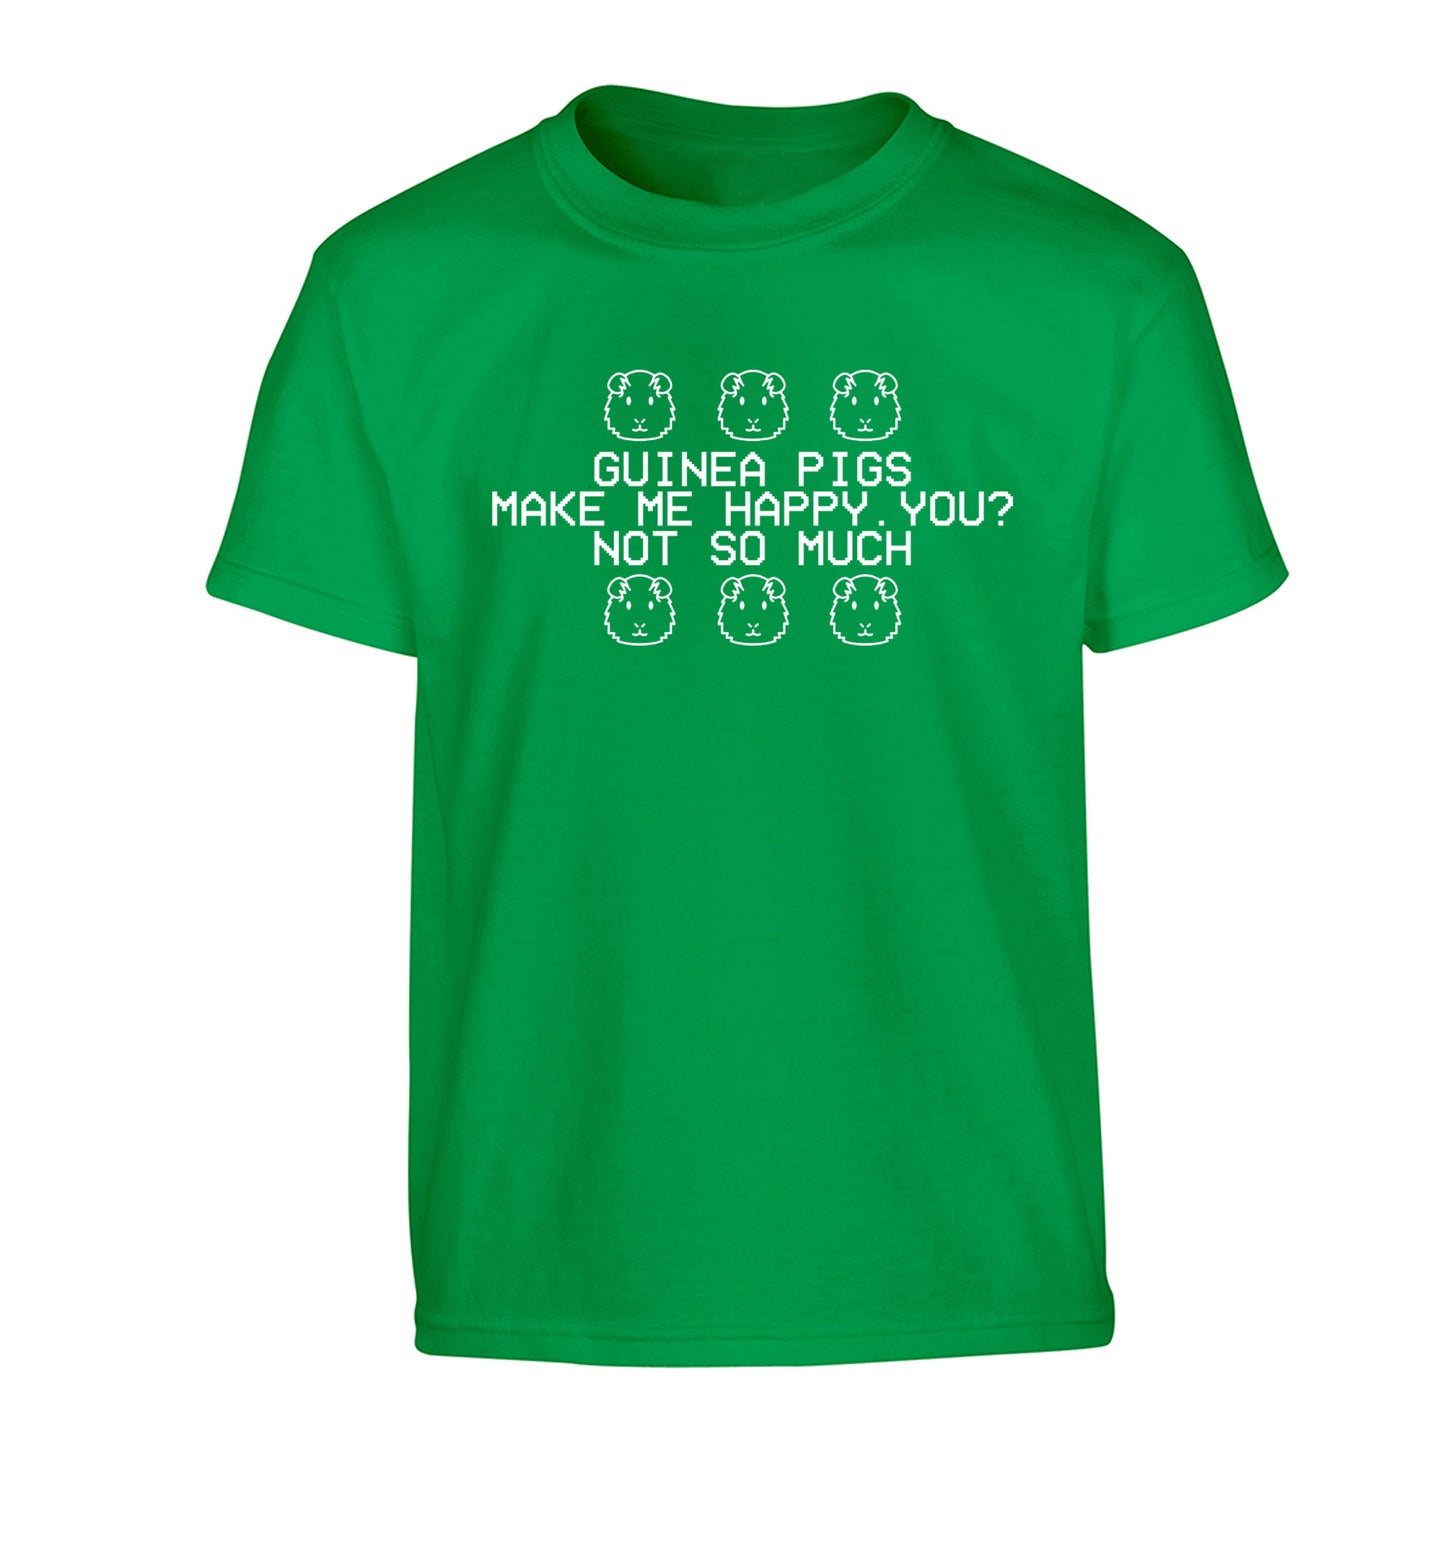 Guinea pigs make me happy, you not so much Children's green Tshirt 12-14 Years